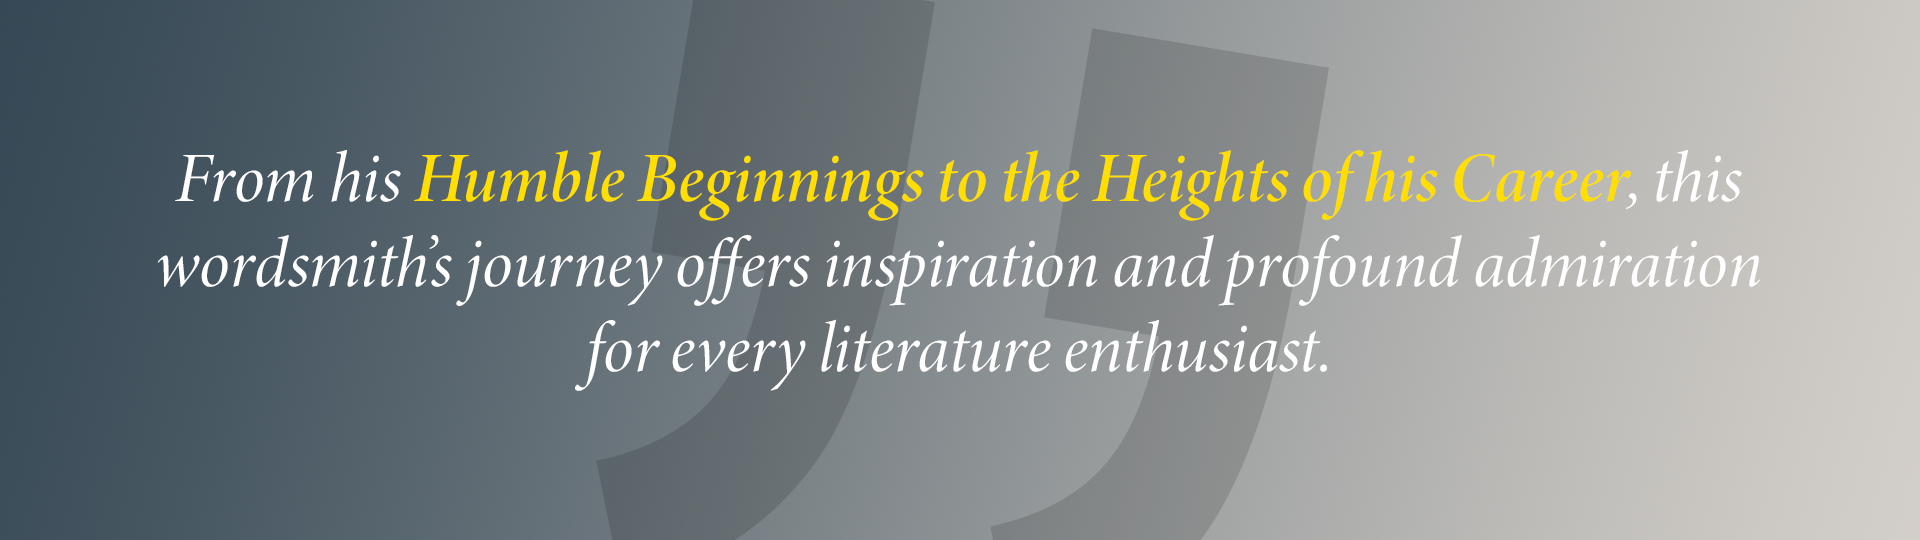 From his Humble Beginnings to the Heights of his Career, this wordsmith’s journey offers inspiration and profound admiration for every literature enthusiast.